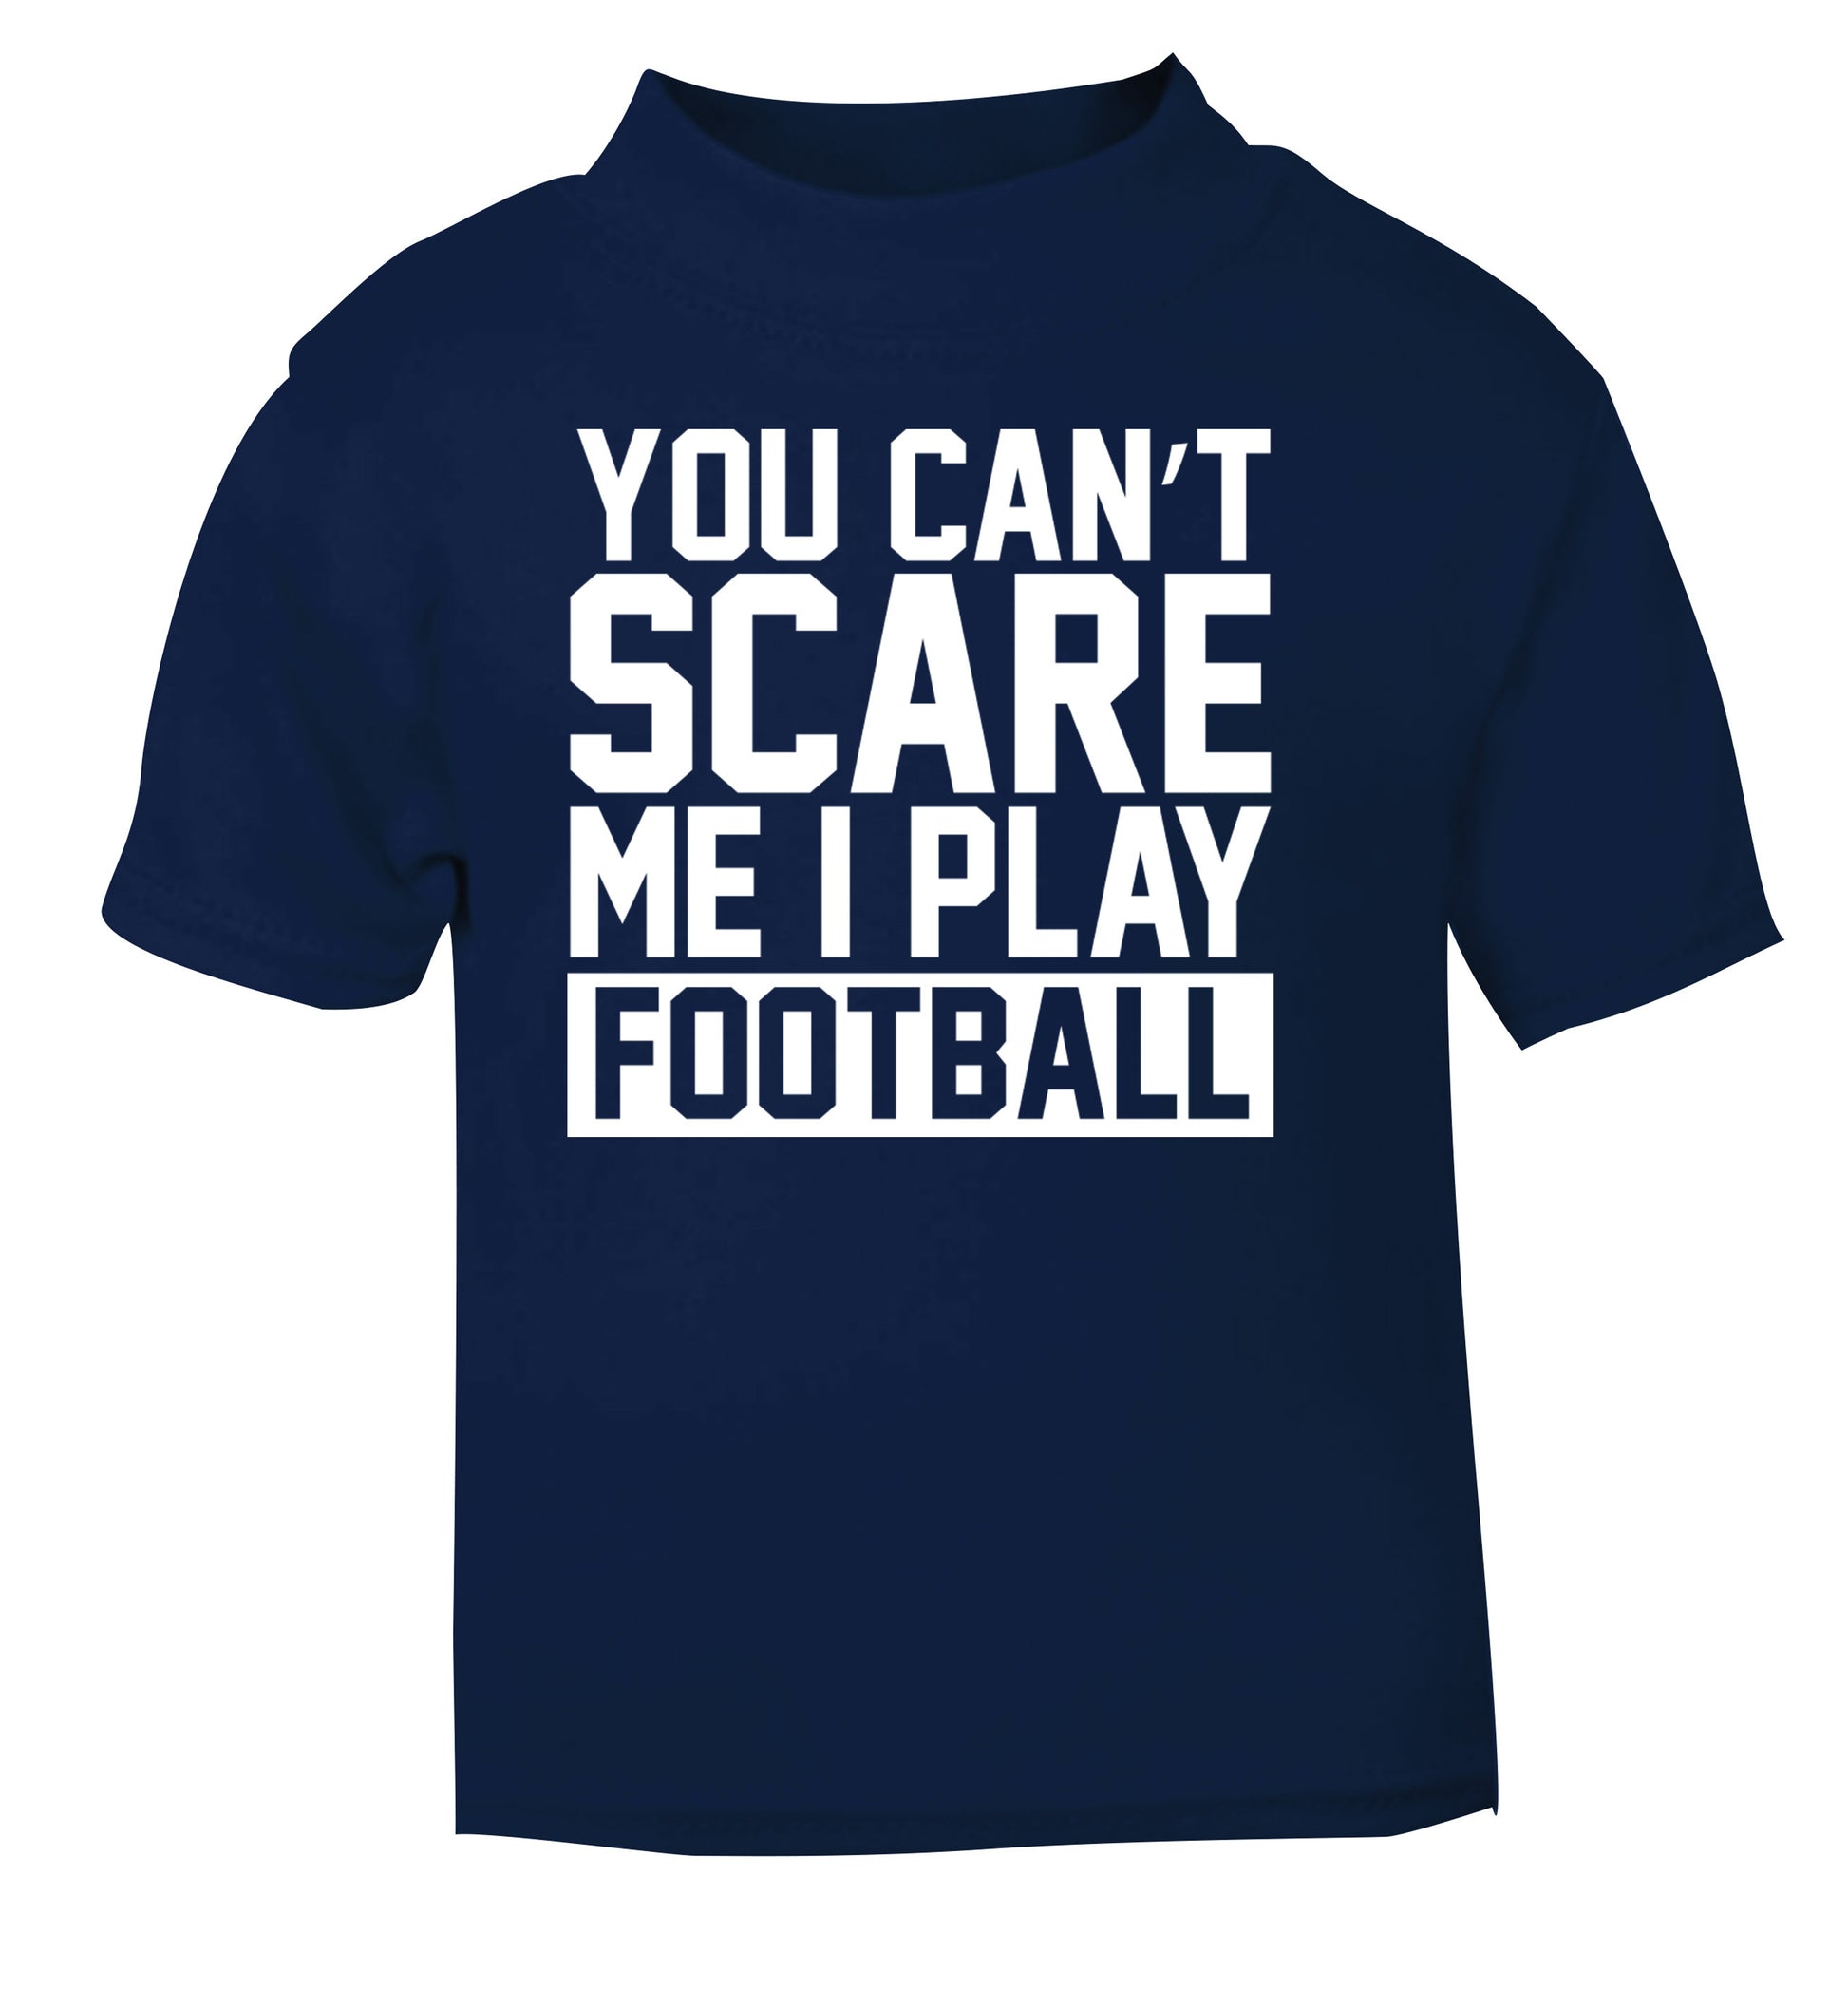 You can't scare me I play football navy Baby Toddler Tshirt 2 Years